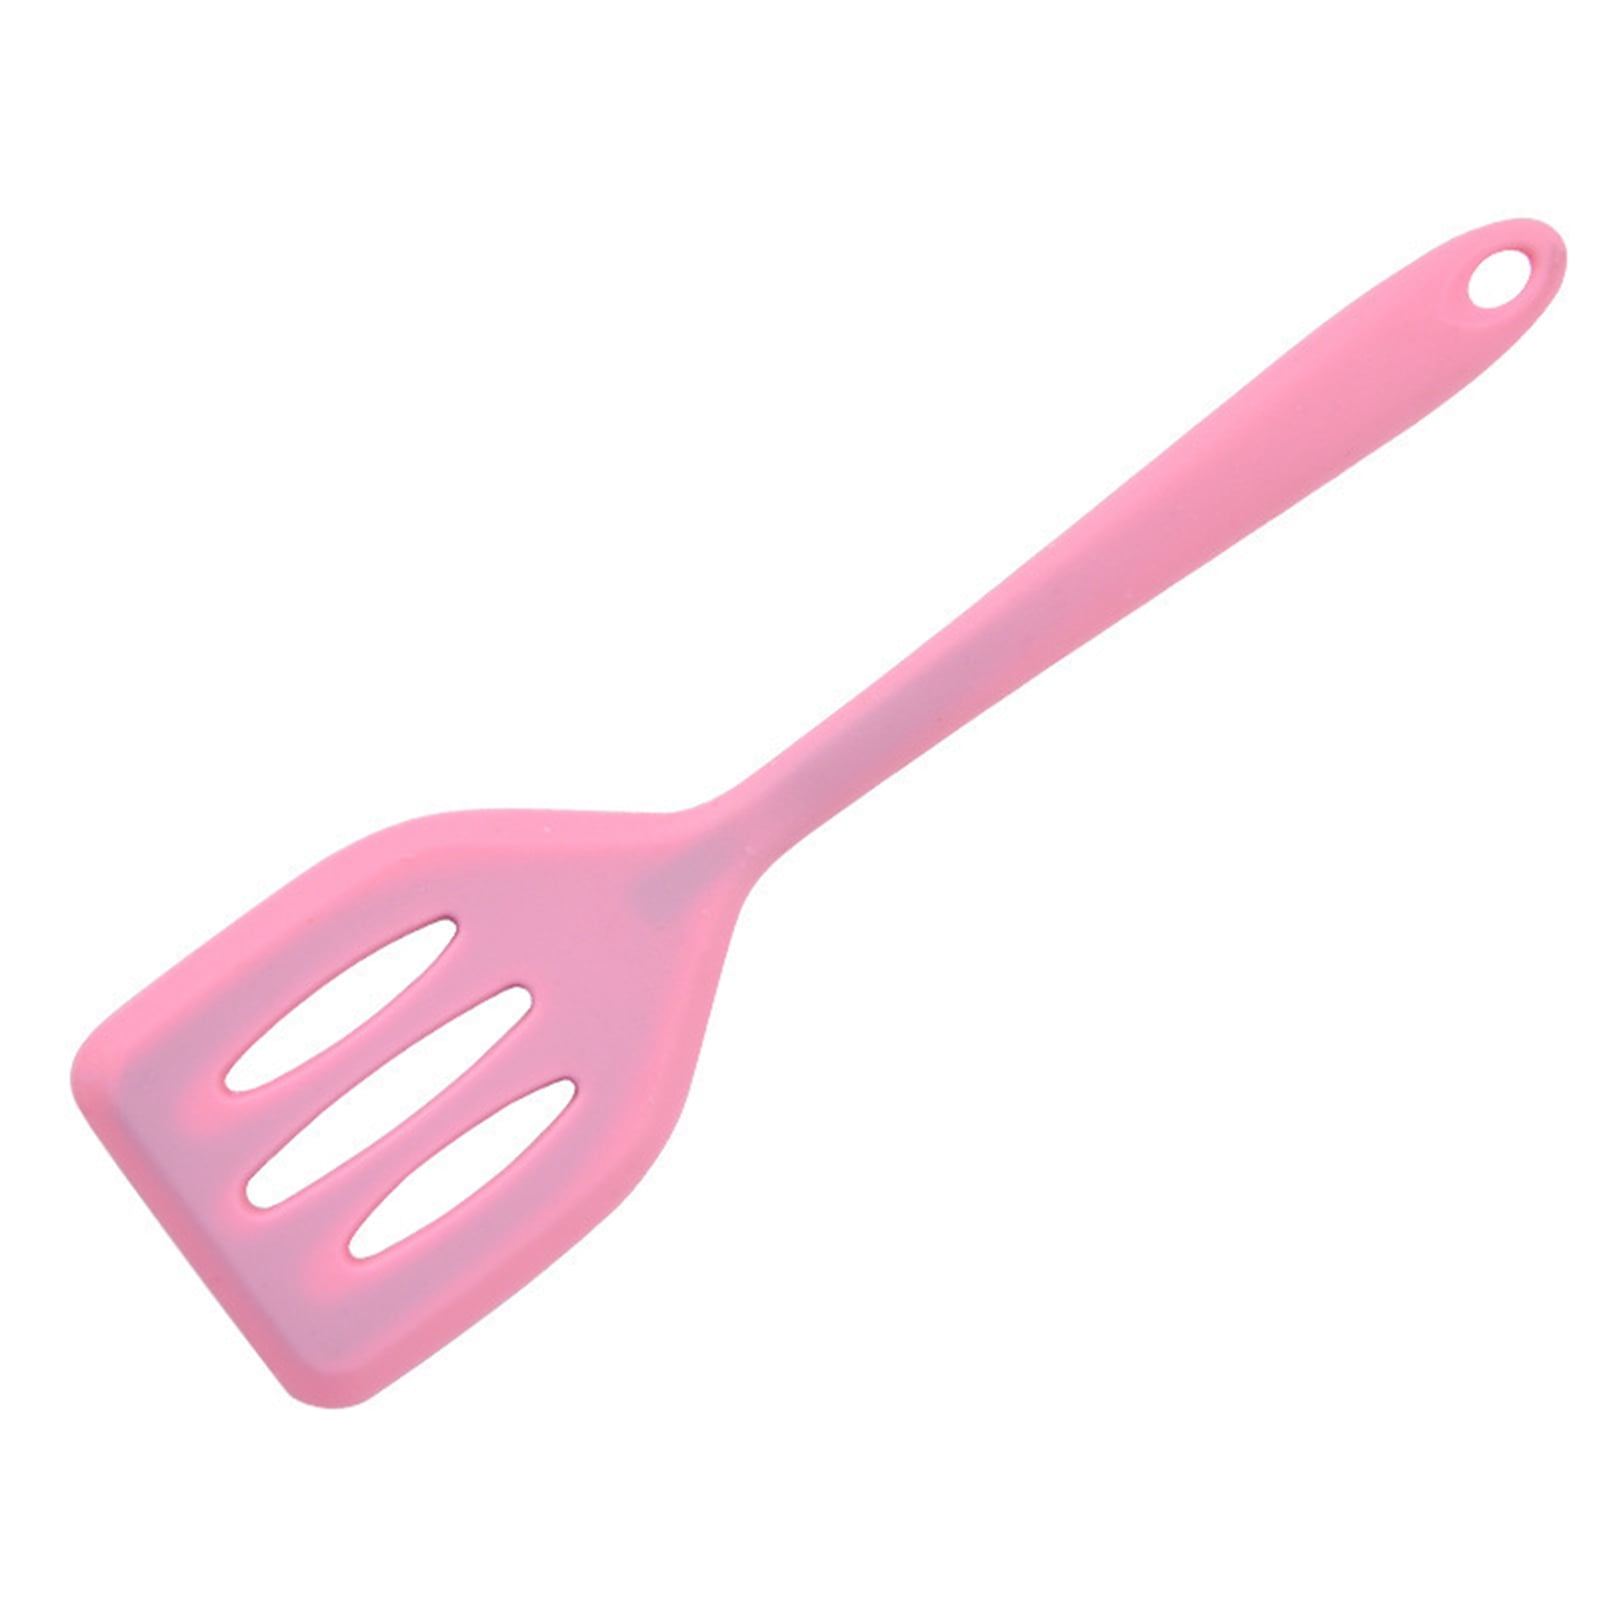 Smrinog Cosmetics Spatula Telescopic Silicone Scoop Peanut Butter for Kitchen (Pink), Clear